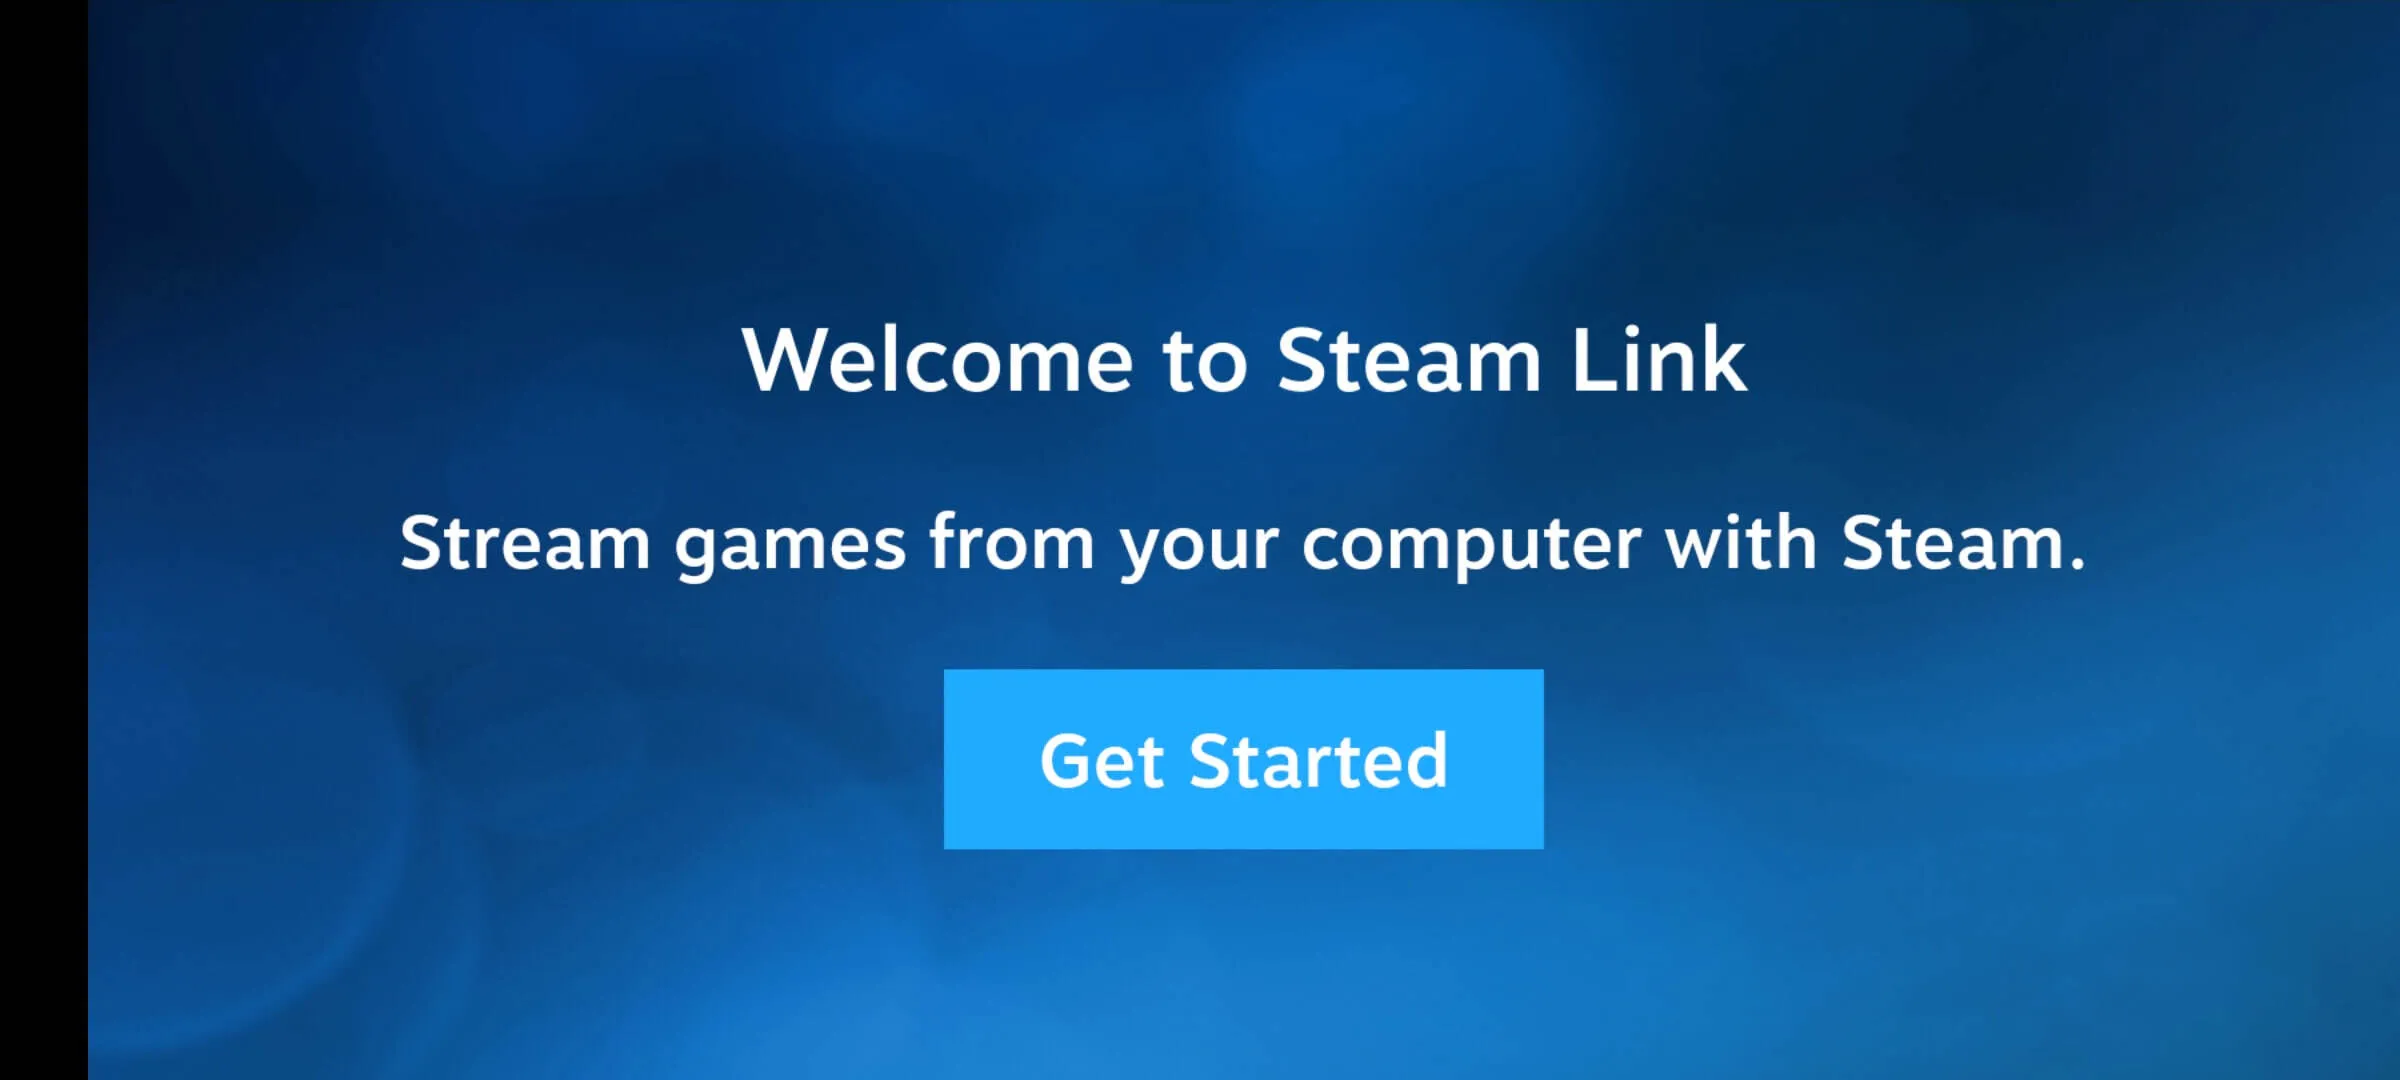 Get started with Steam Link